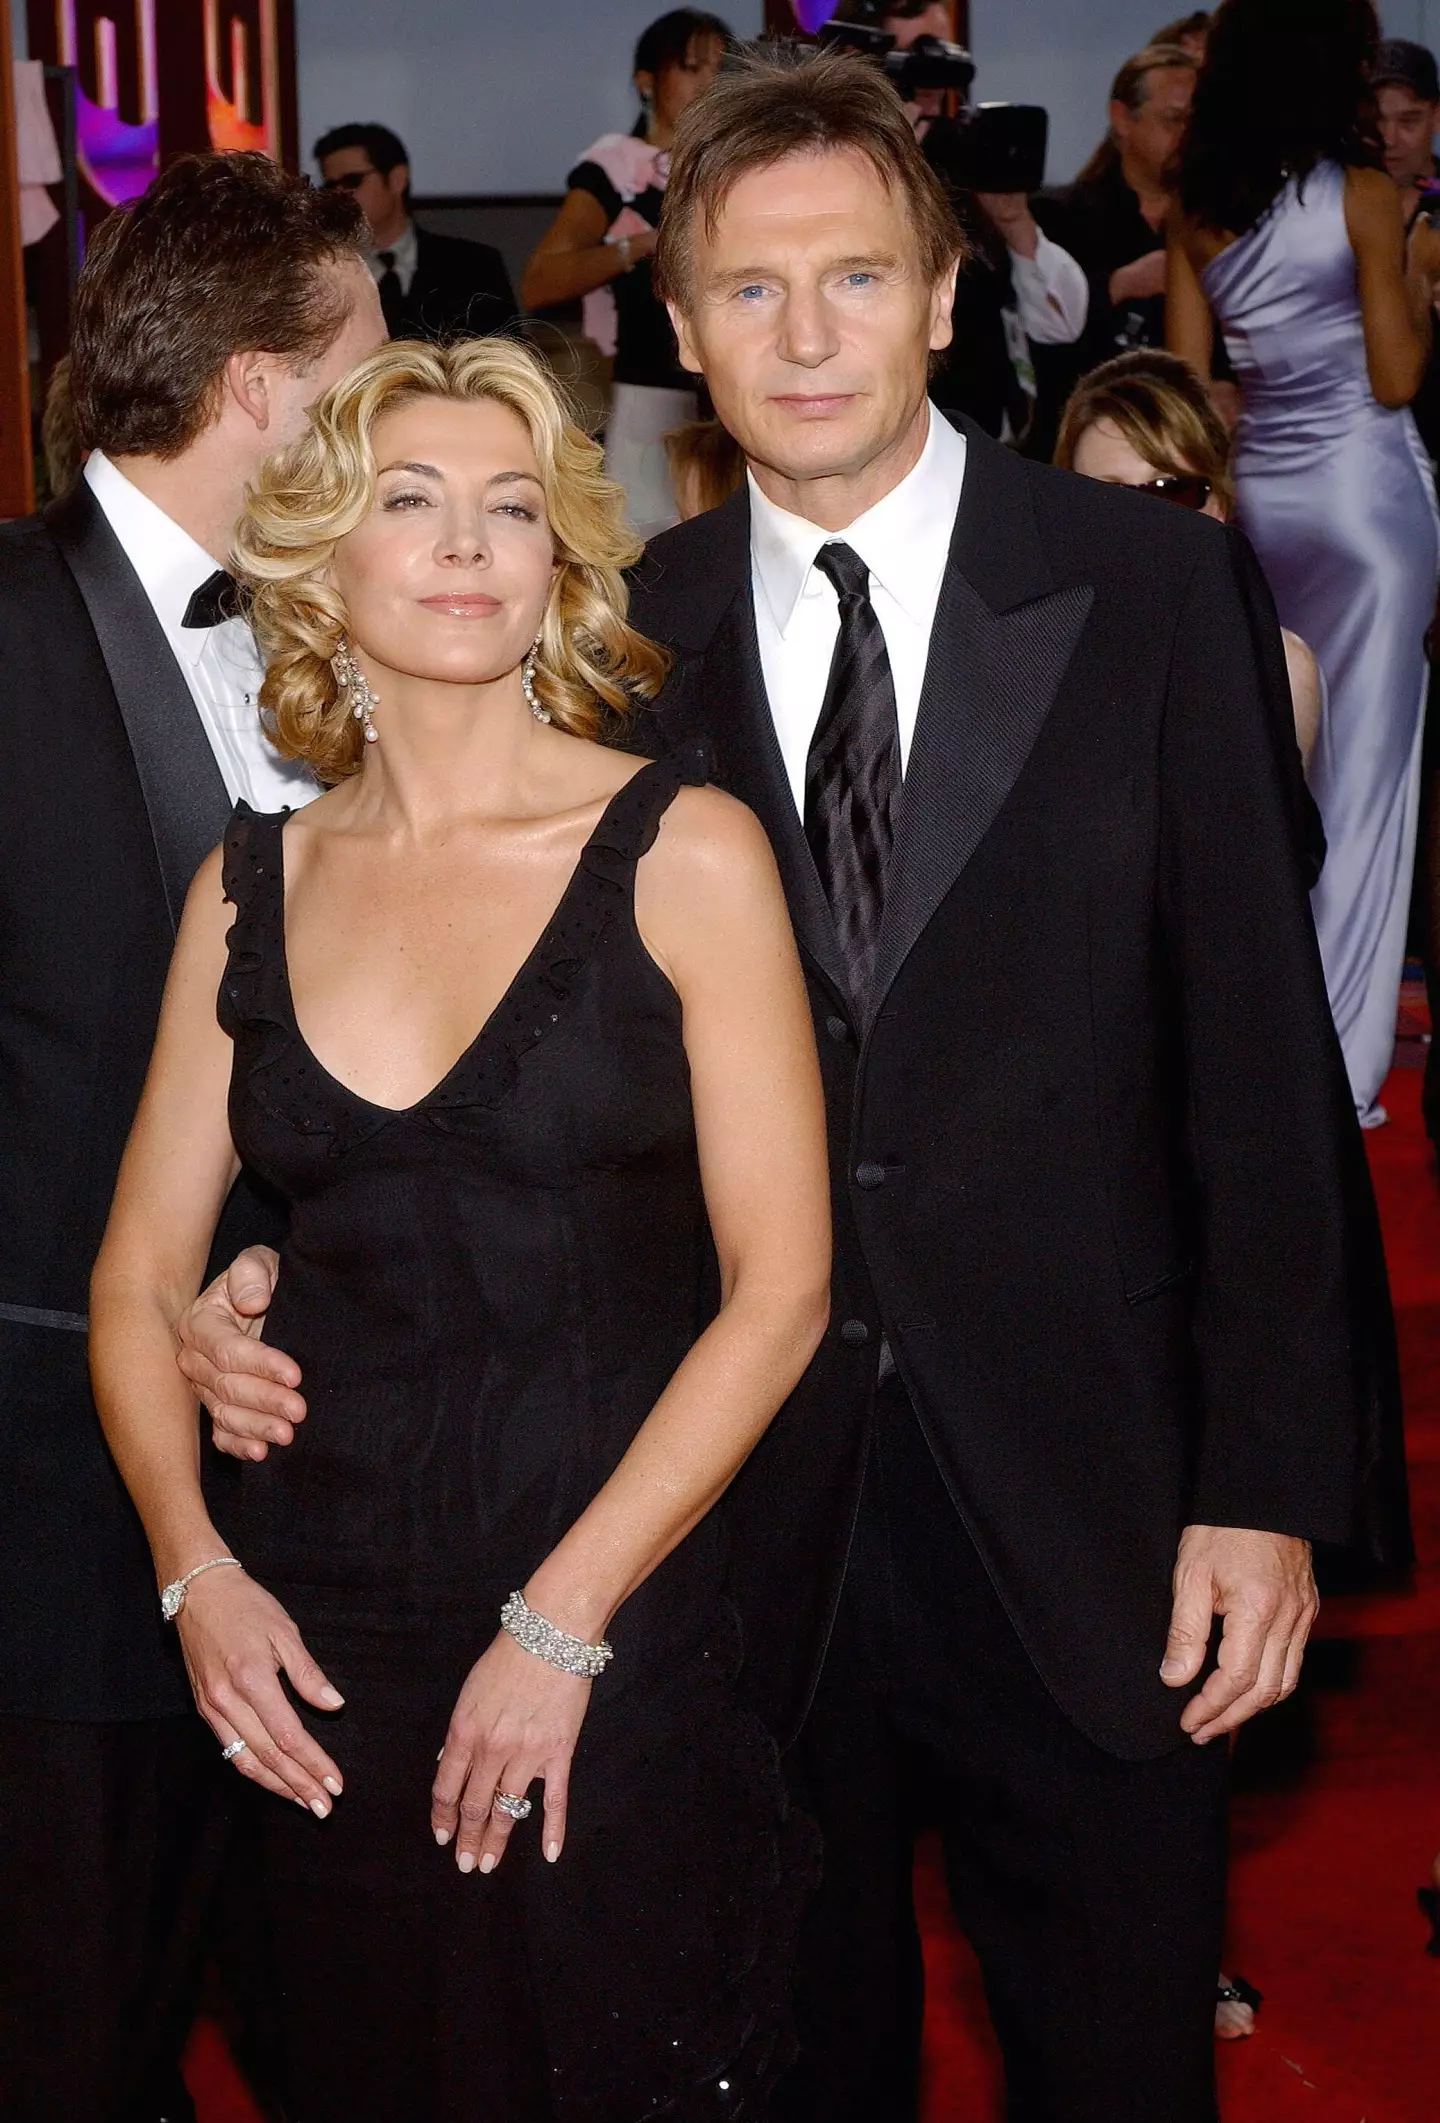 Natasha Richardson and Liam Neeson were married for 15 years before she tragically passed away.